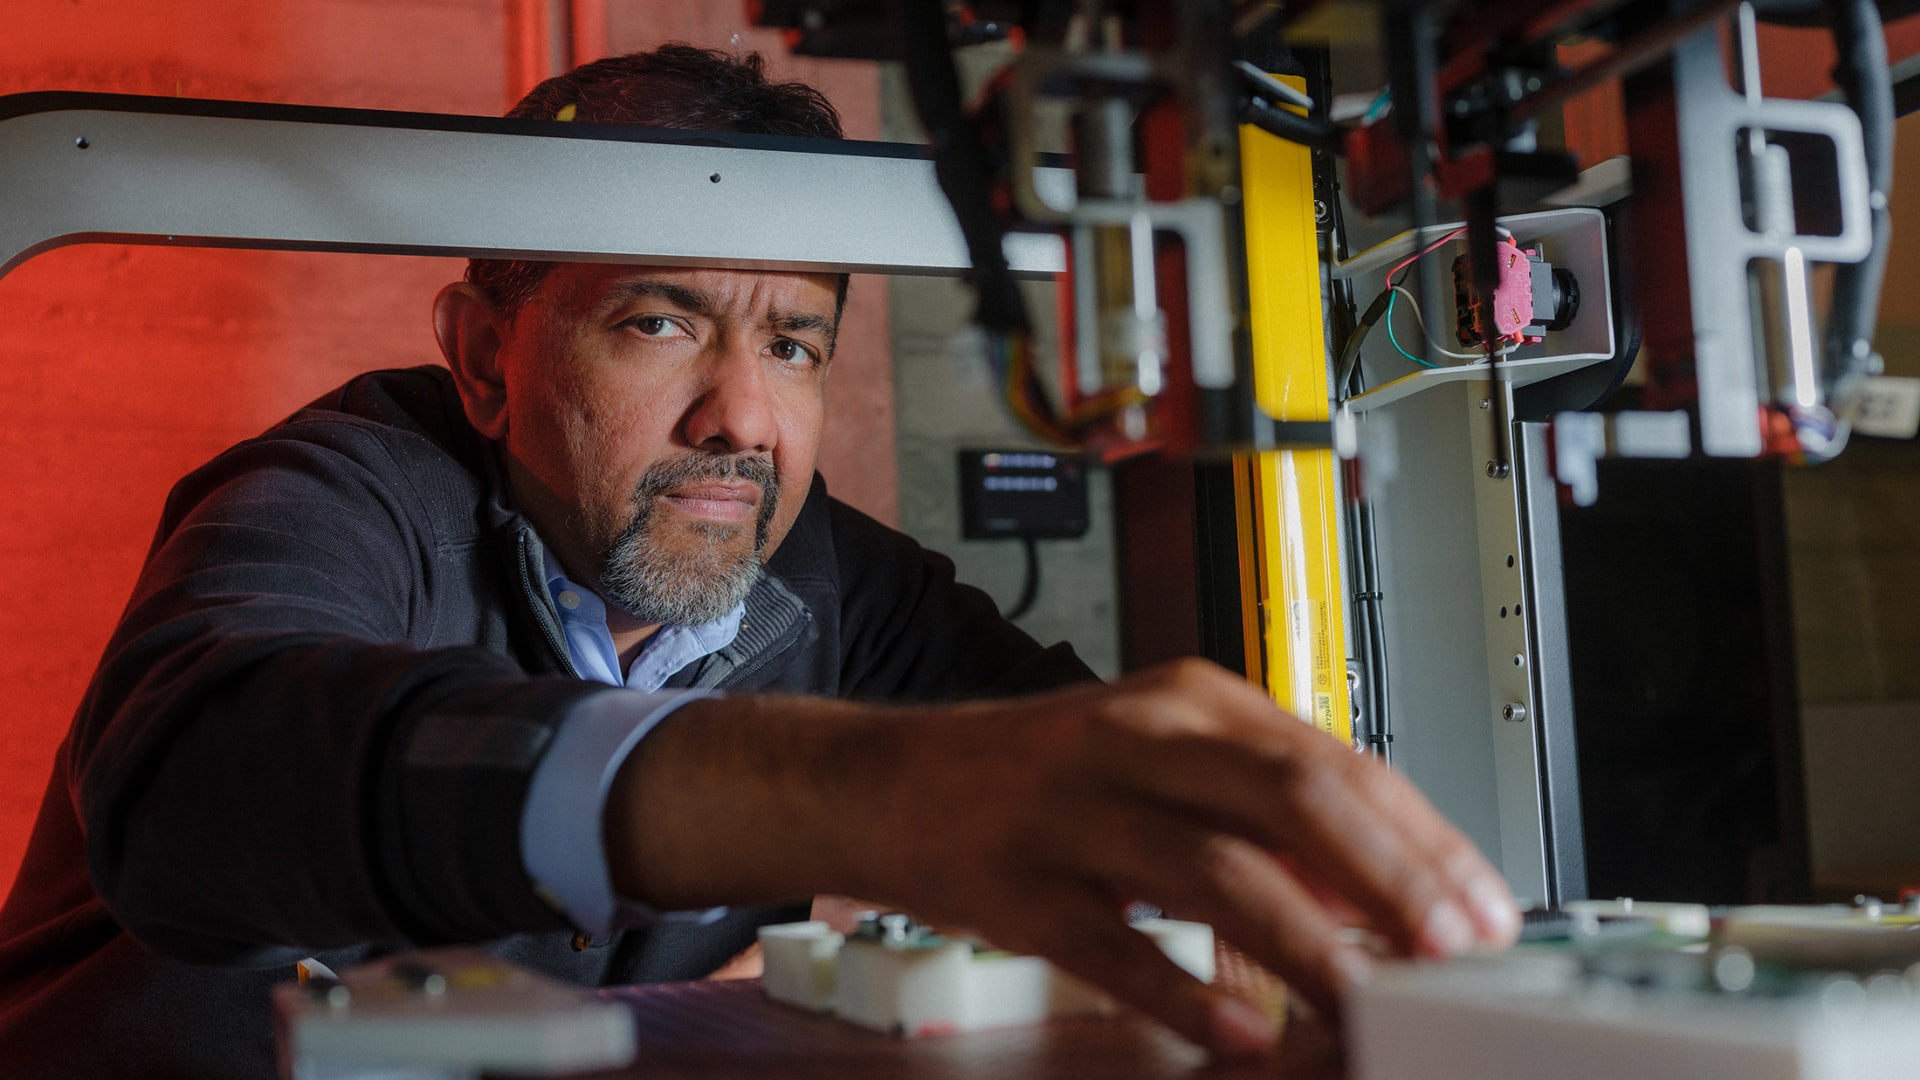 “We thought we could do something radically different,” says Bright Machines CEO Amar Hanspal. The radical part of the plan? Power networks of flexible micro-factories in the U.S., which will solve common logistics headaches and generate high-quality American manufacturing jobs.